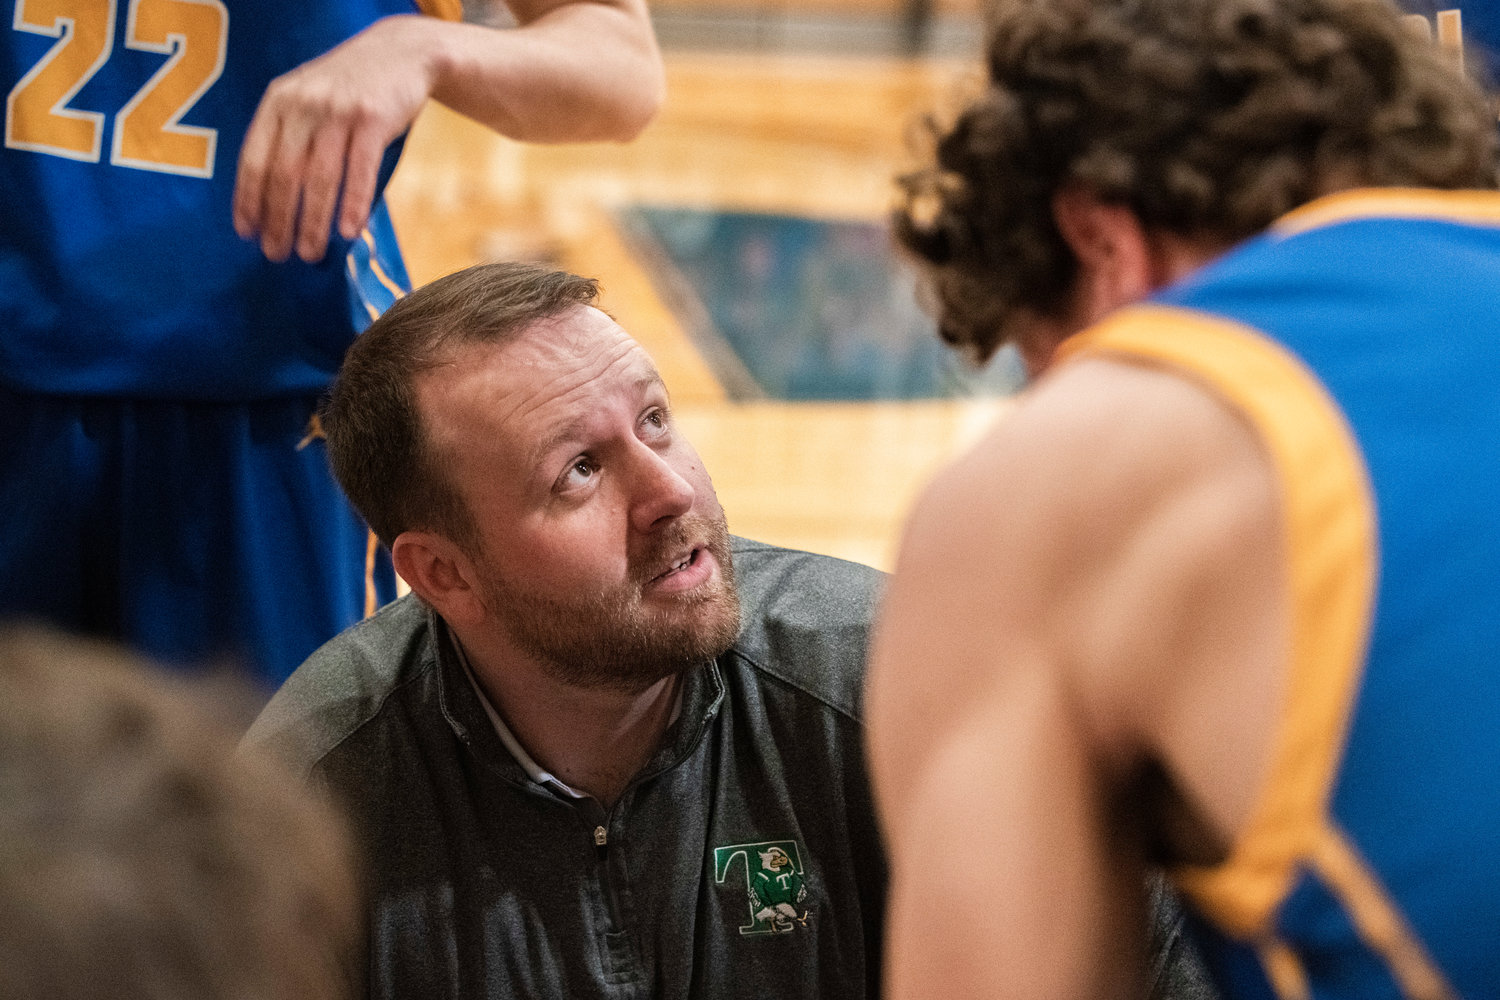 Tumwater Head Coach Josh Wilson talks to players during a Southwest Washington High School All-Star game at Centralia College Friday night.